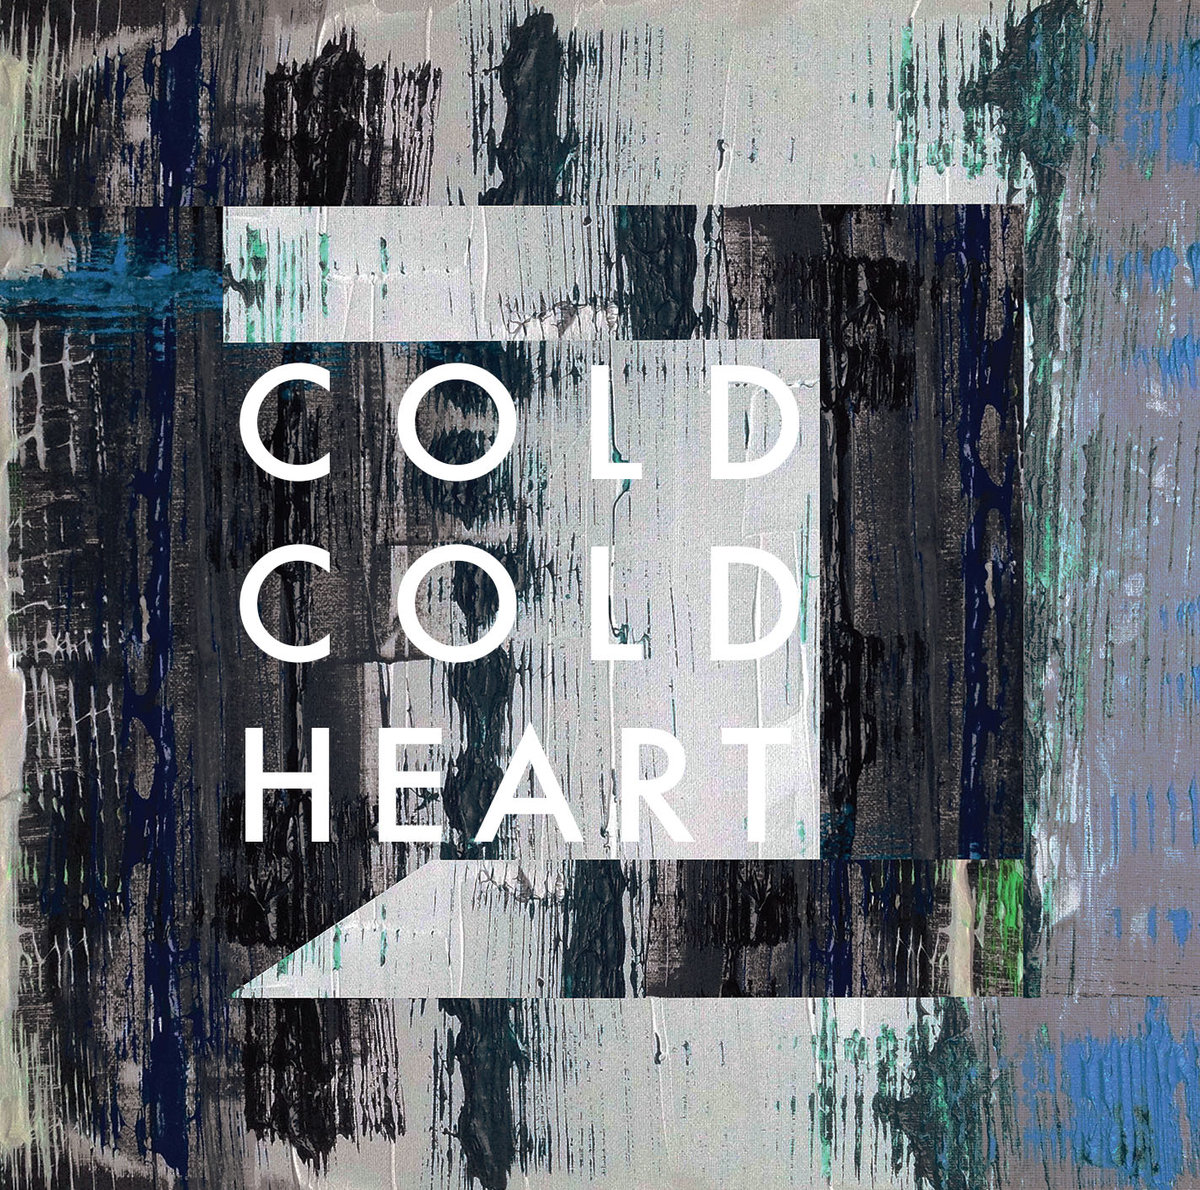 Cold, Cold Heart – How the Other Half Live and Die